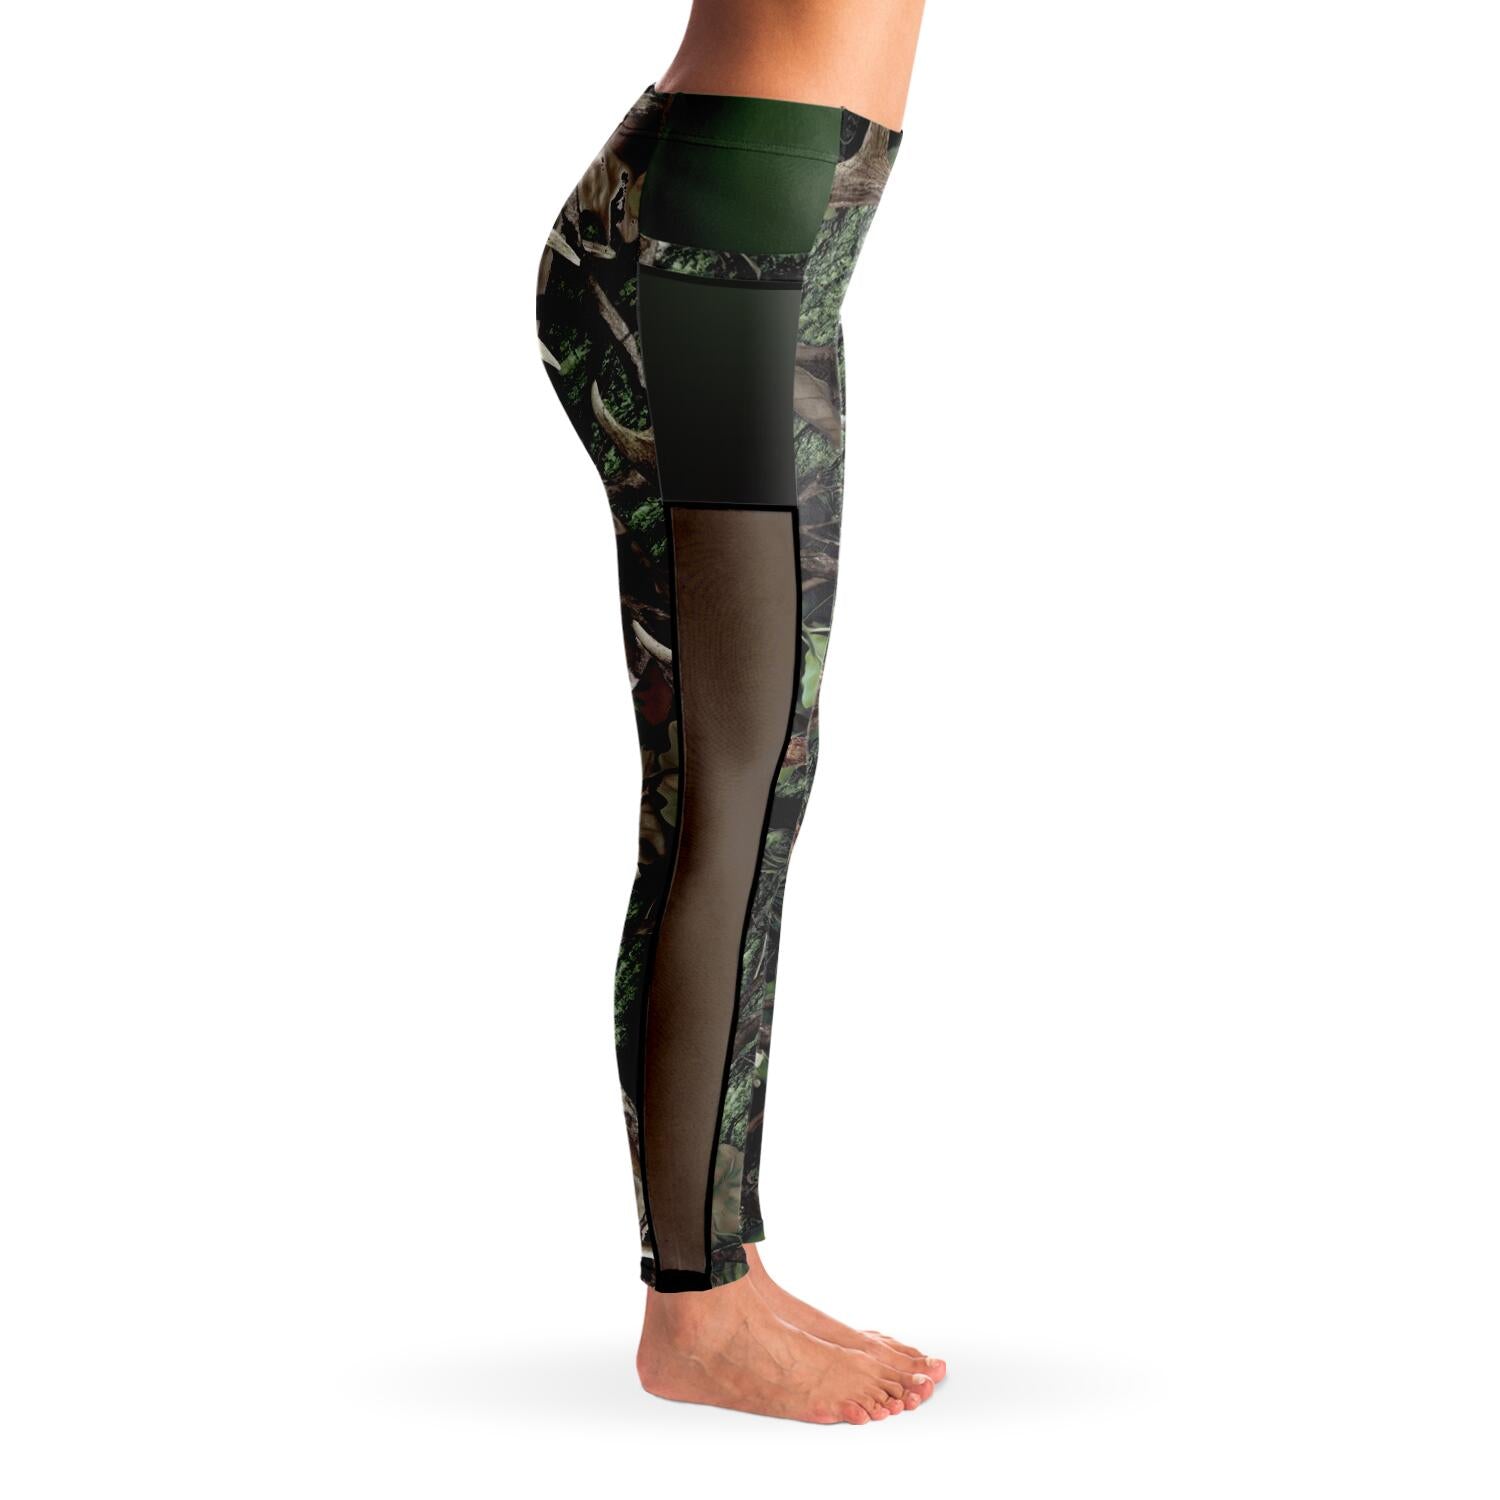 Lightweight Women's leggings - Hammock – FL Camo - Florida and The South's  premier camo patterns and gear.